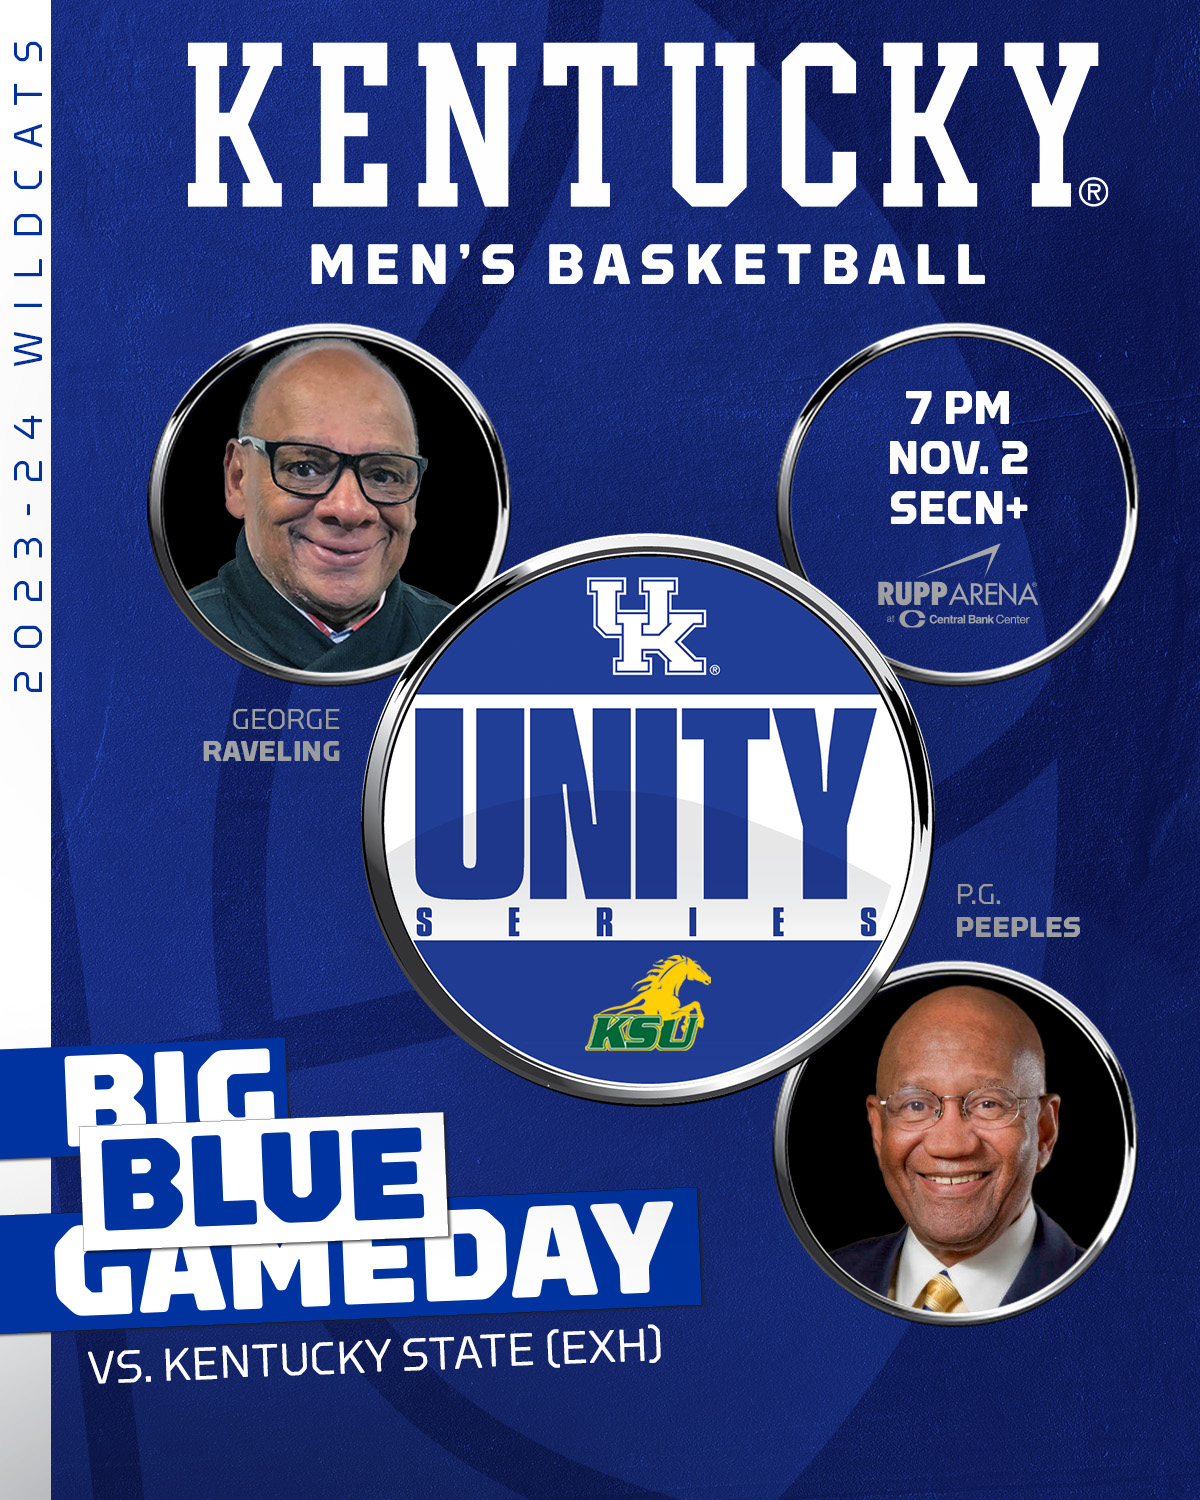 Listen and Watch UK Sports Network Radio Coverage of Kentucky Men's Basketball vs Kentucky State (Exhibition)